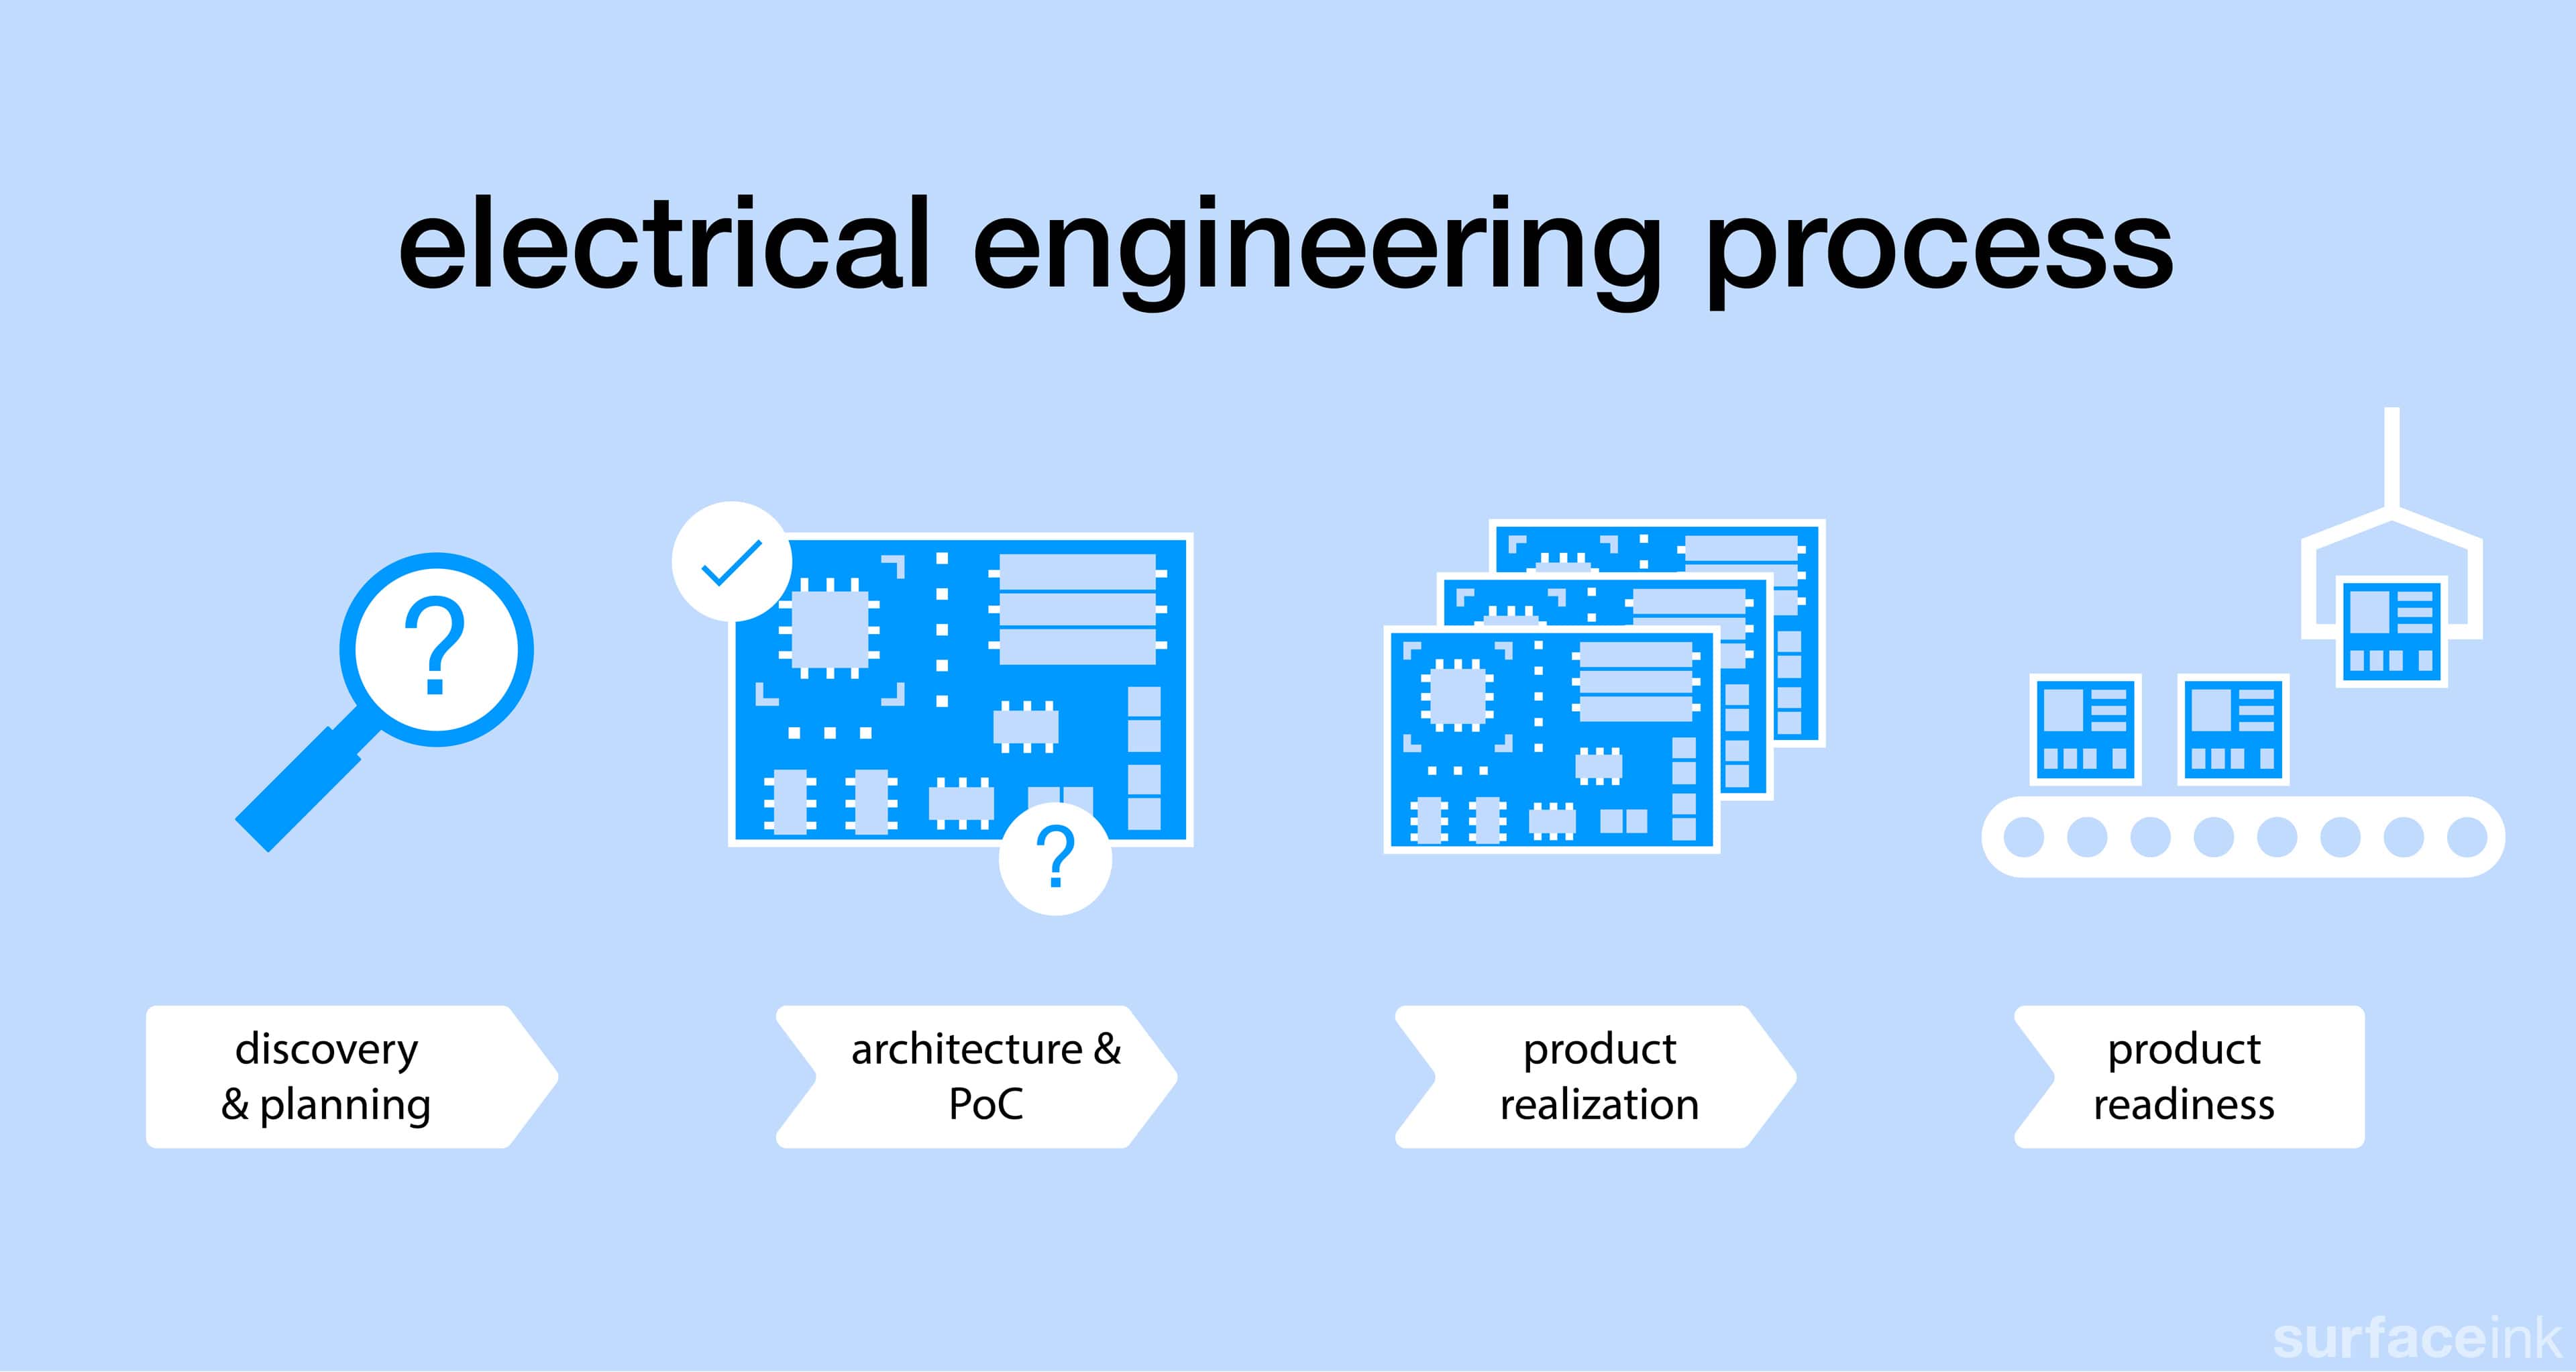 surfaceink-services-processes-illustration_6-electrical-engineering